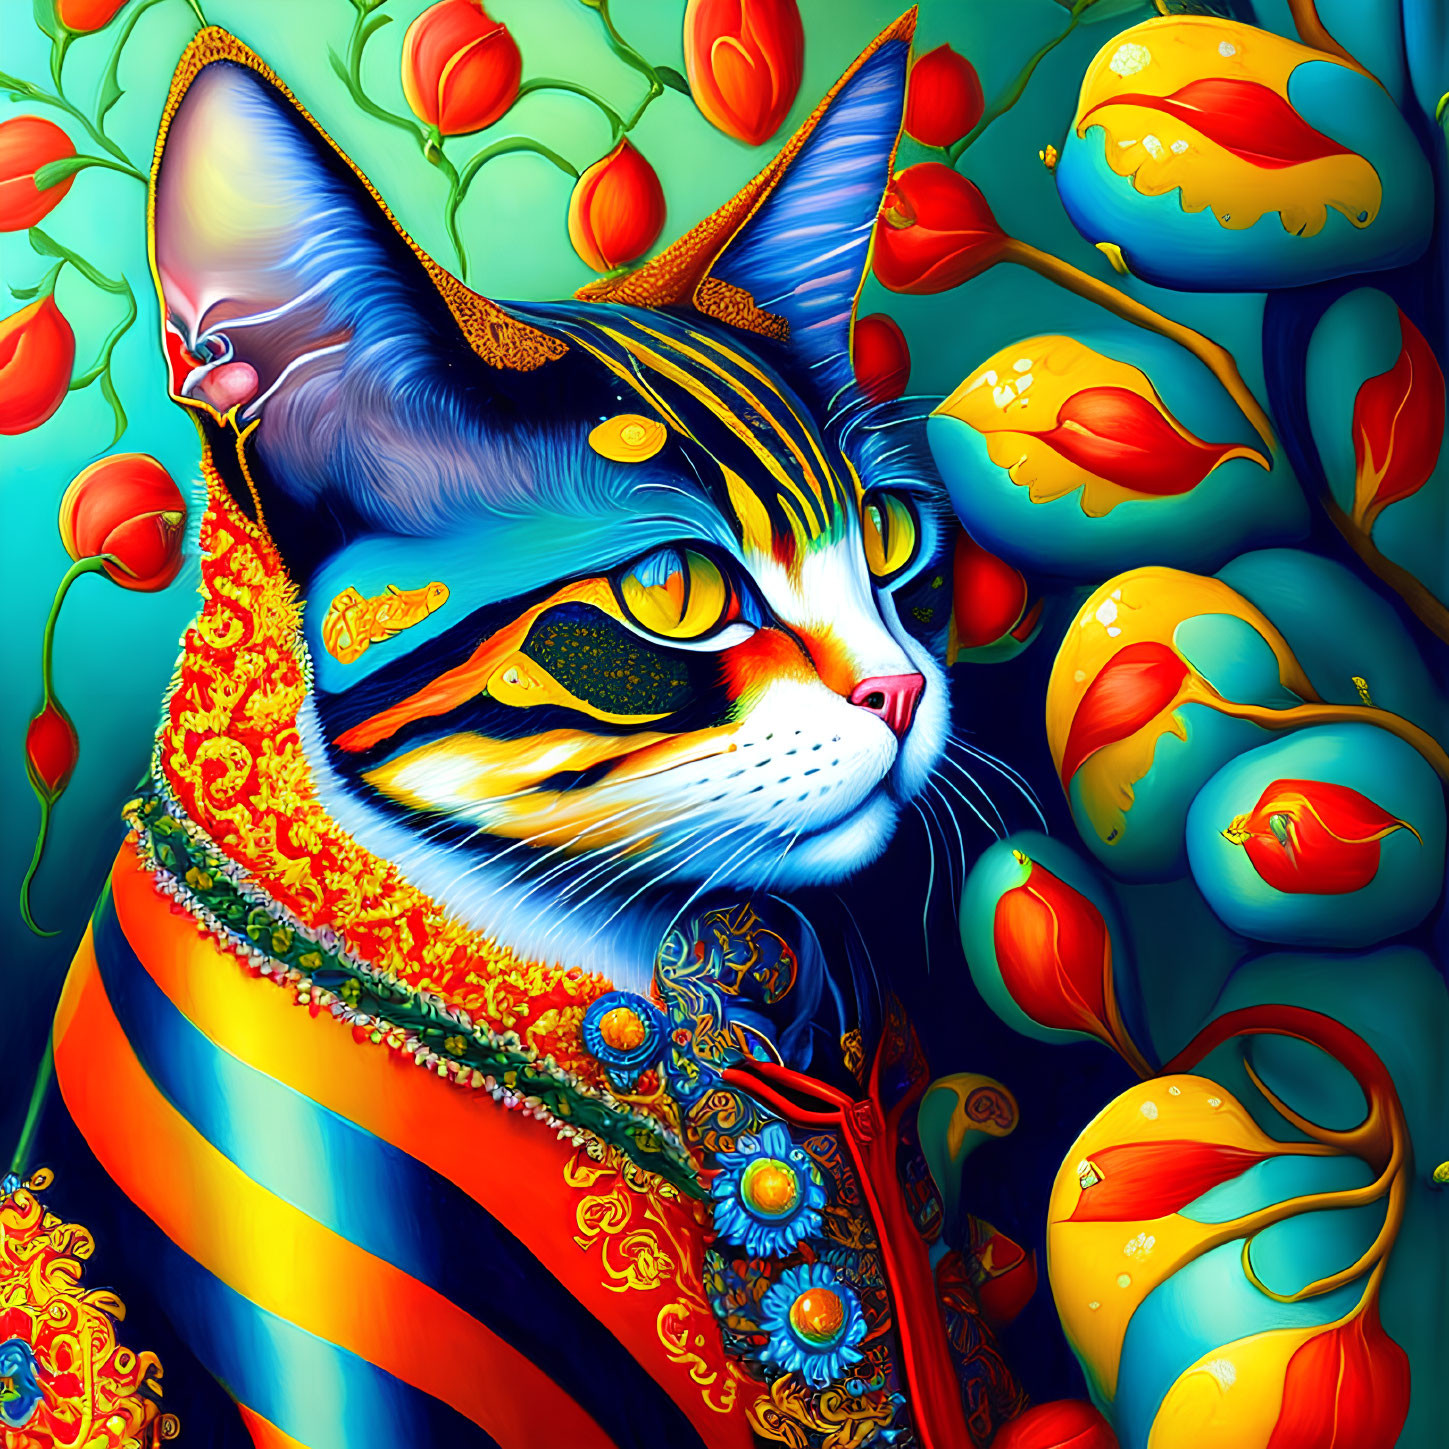 Colorful Cat Artwork with Elaborate Patterns and Tulip Background